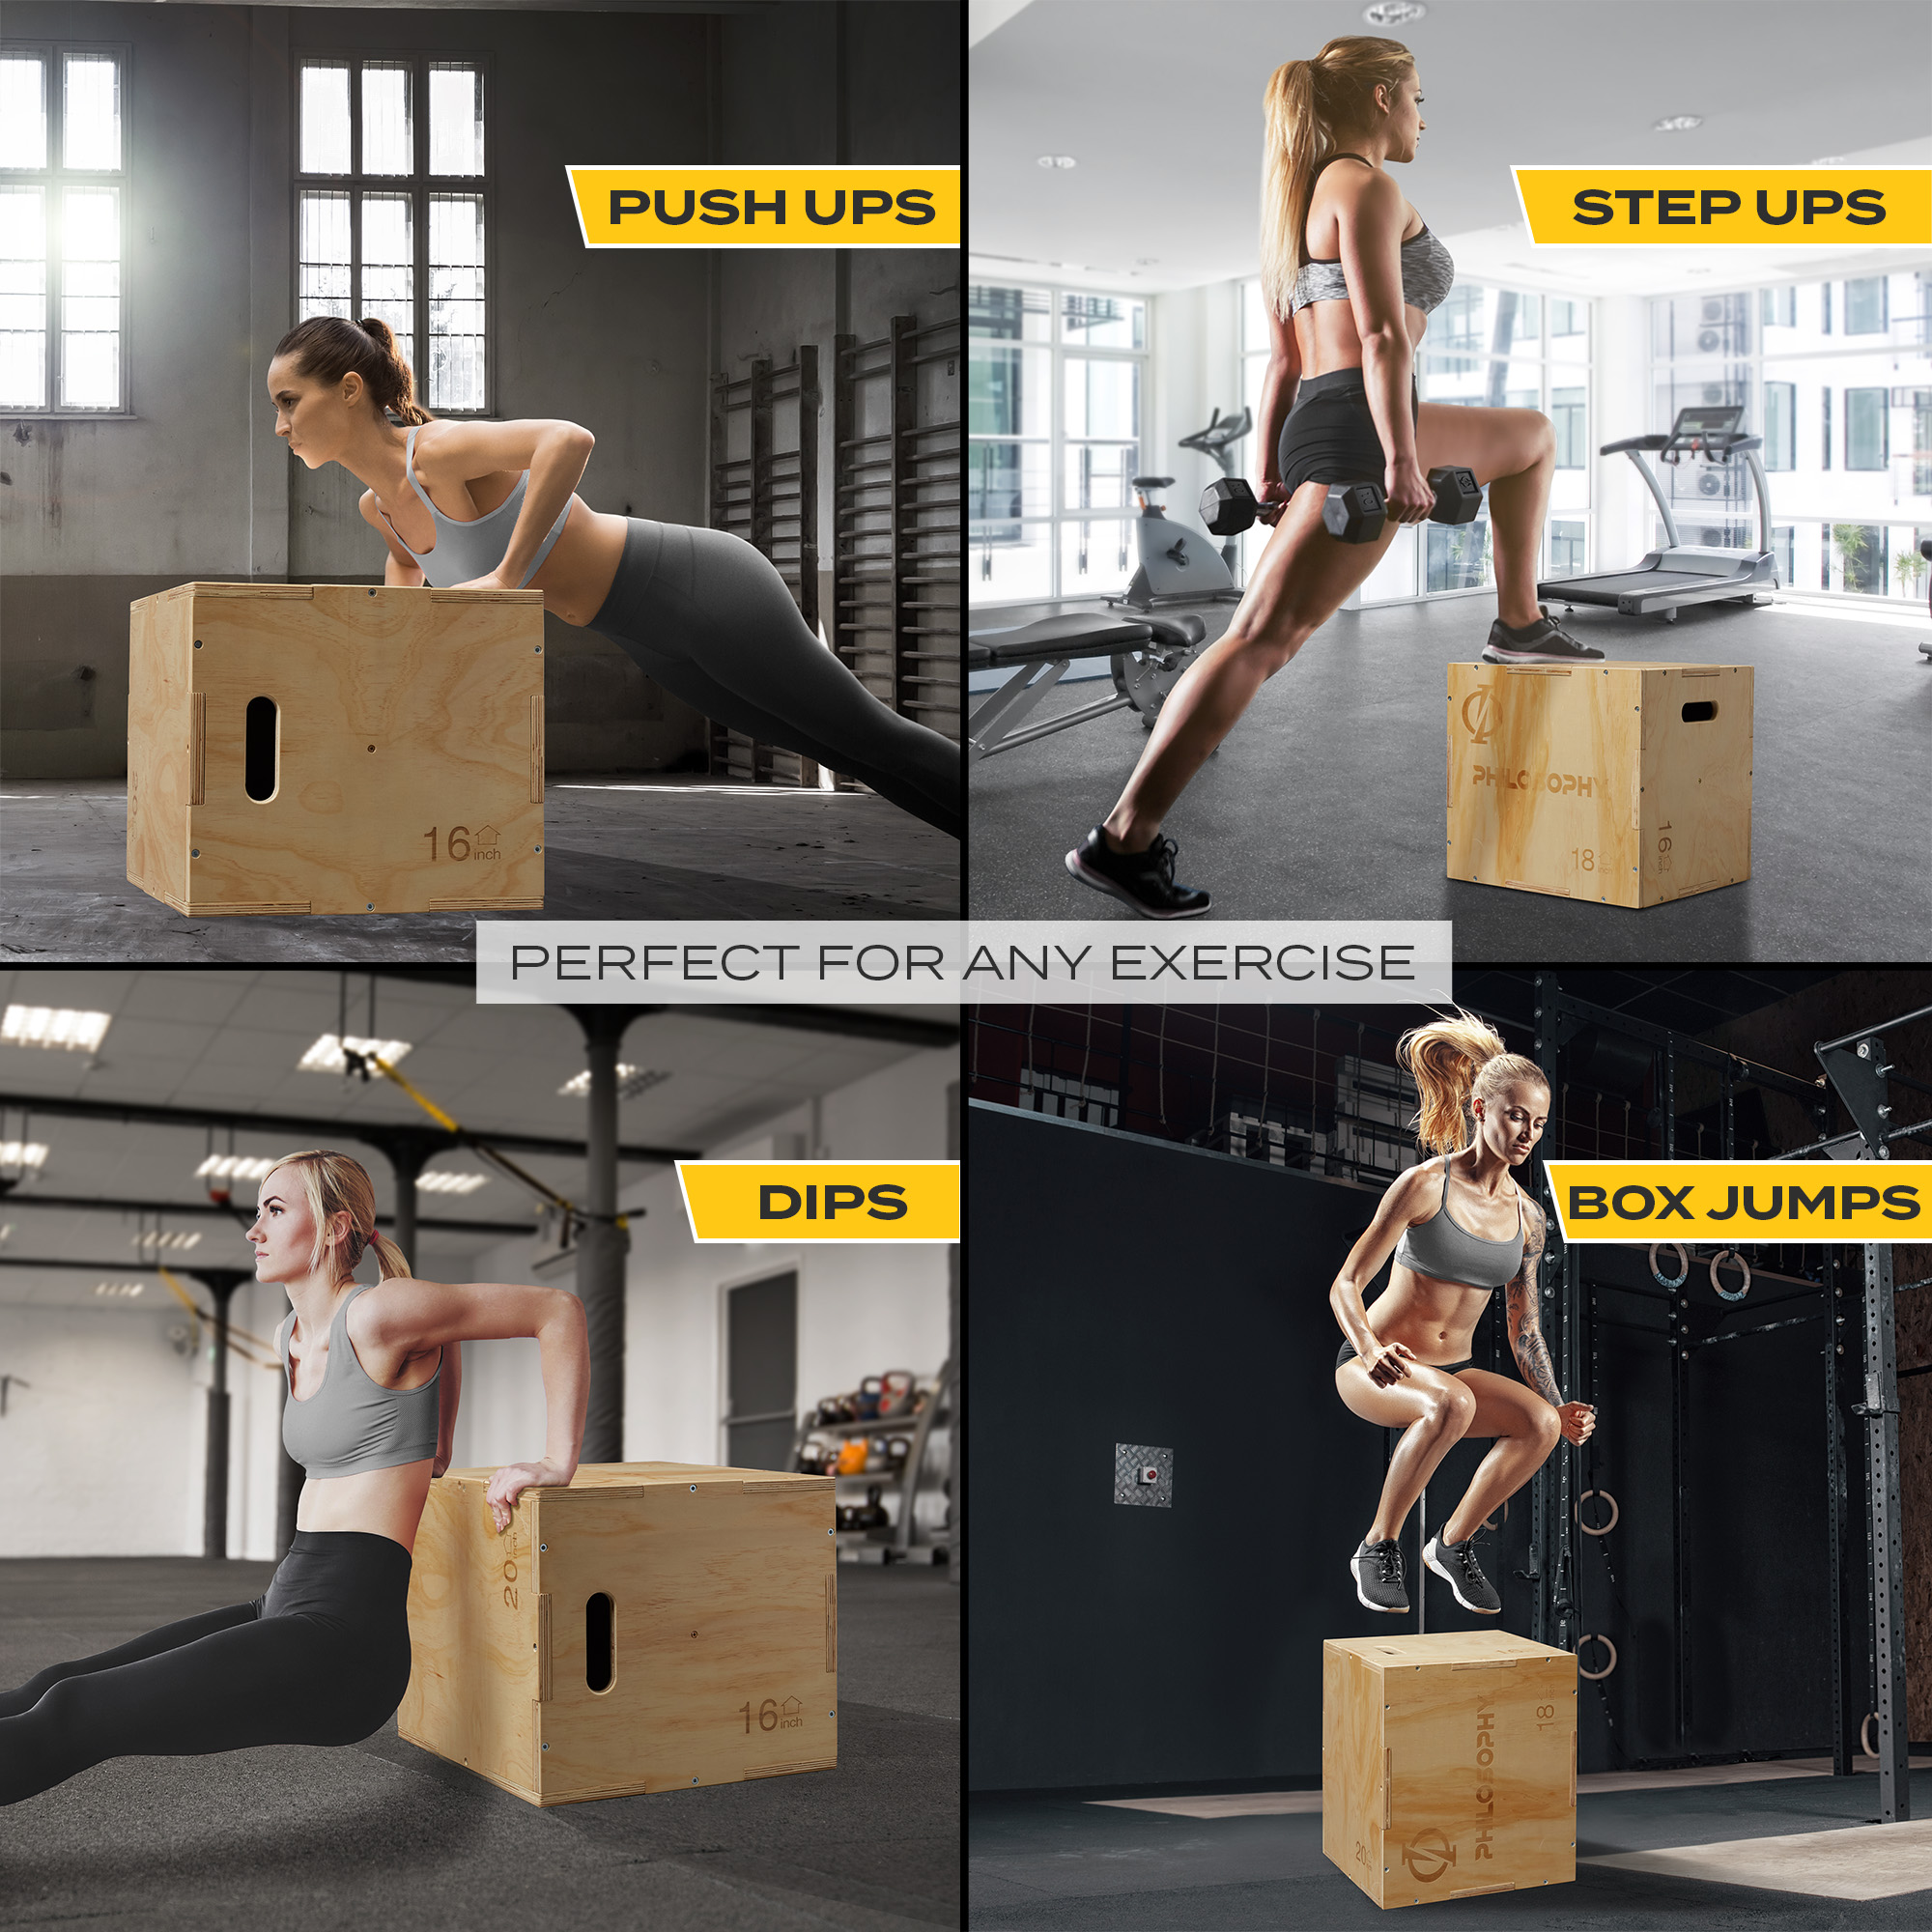 Philosophy Gym 3 in 1 Wood Plyometric Box, 24" x 20" x 16" Jumping Box for Training & Conditioning